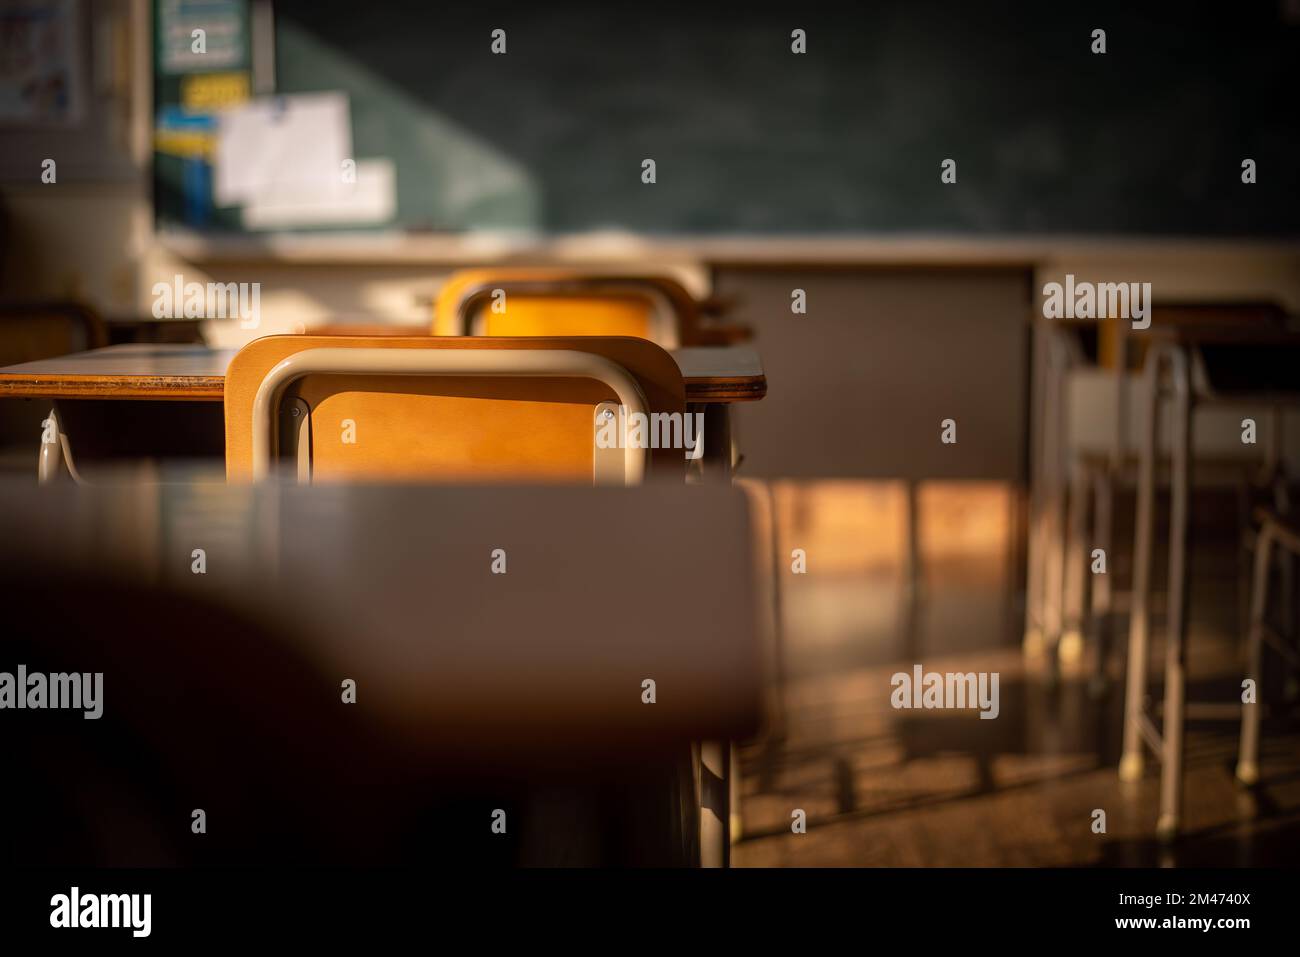 school chairs and desks in an empty Japanese school classroom Stock Photo